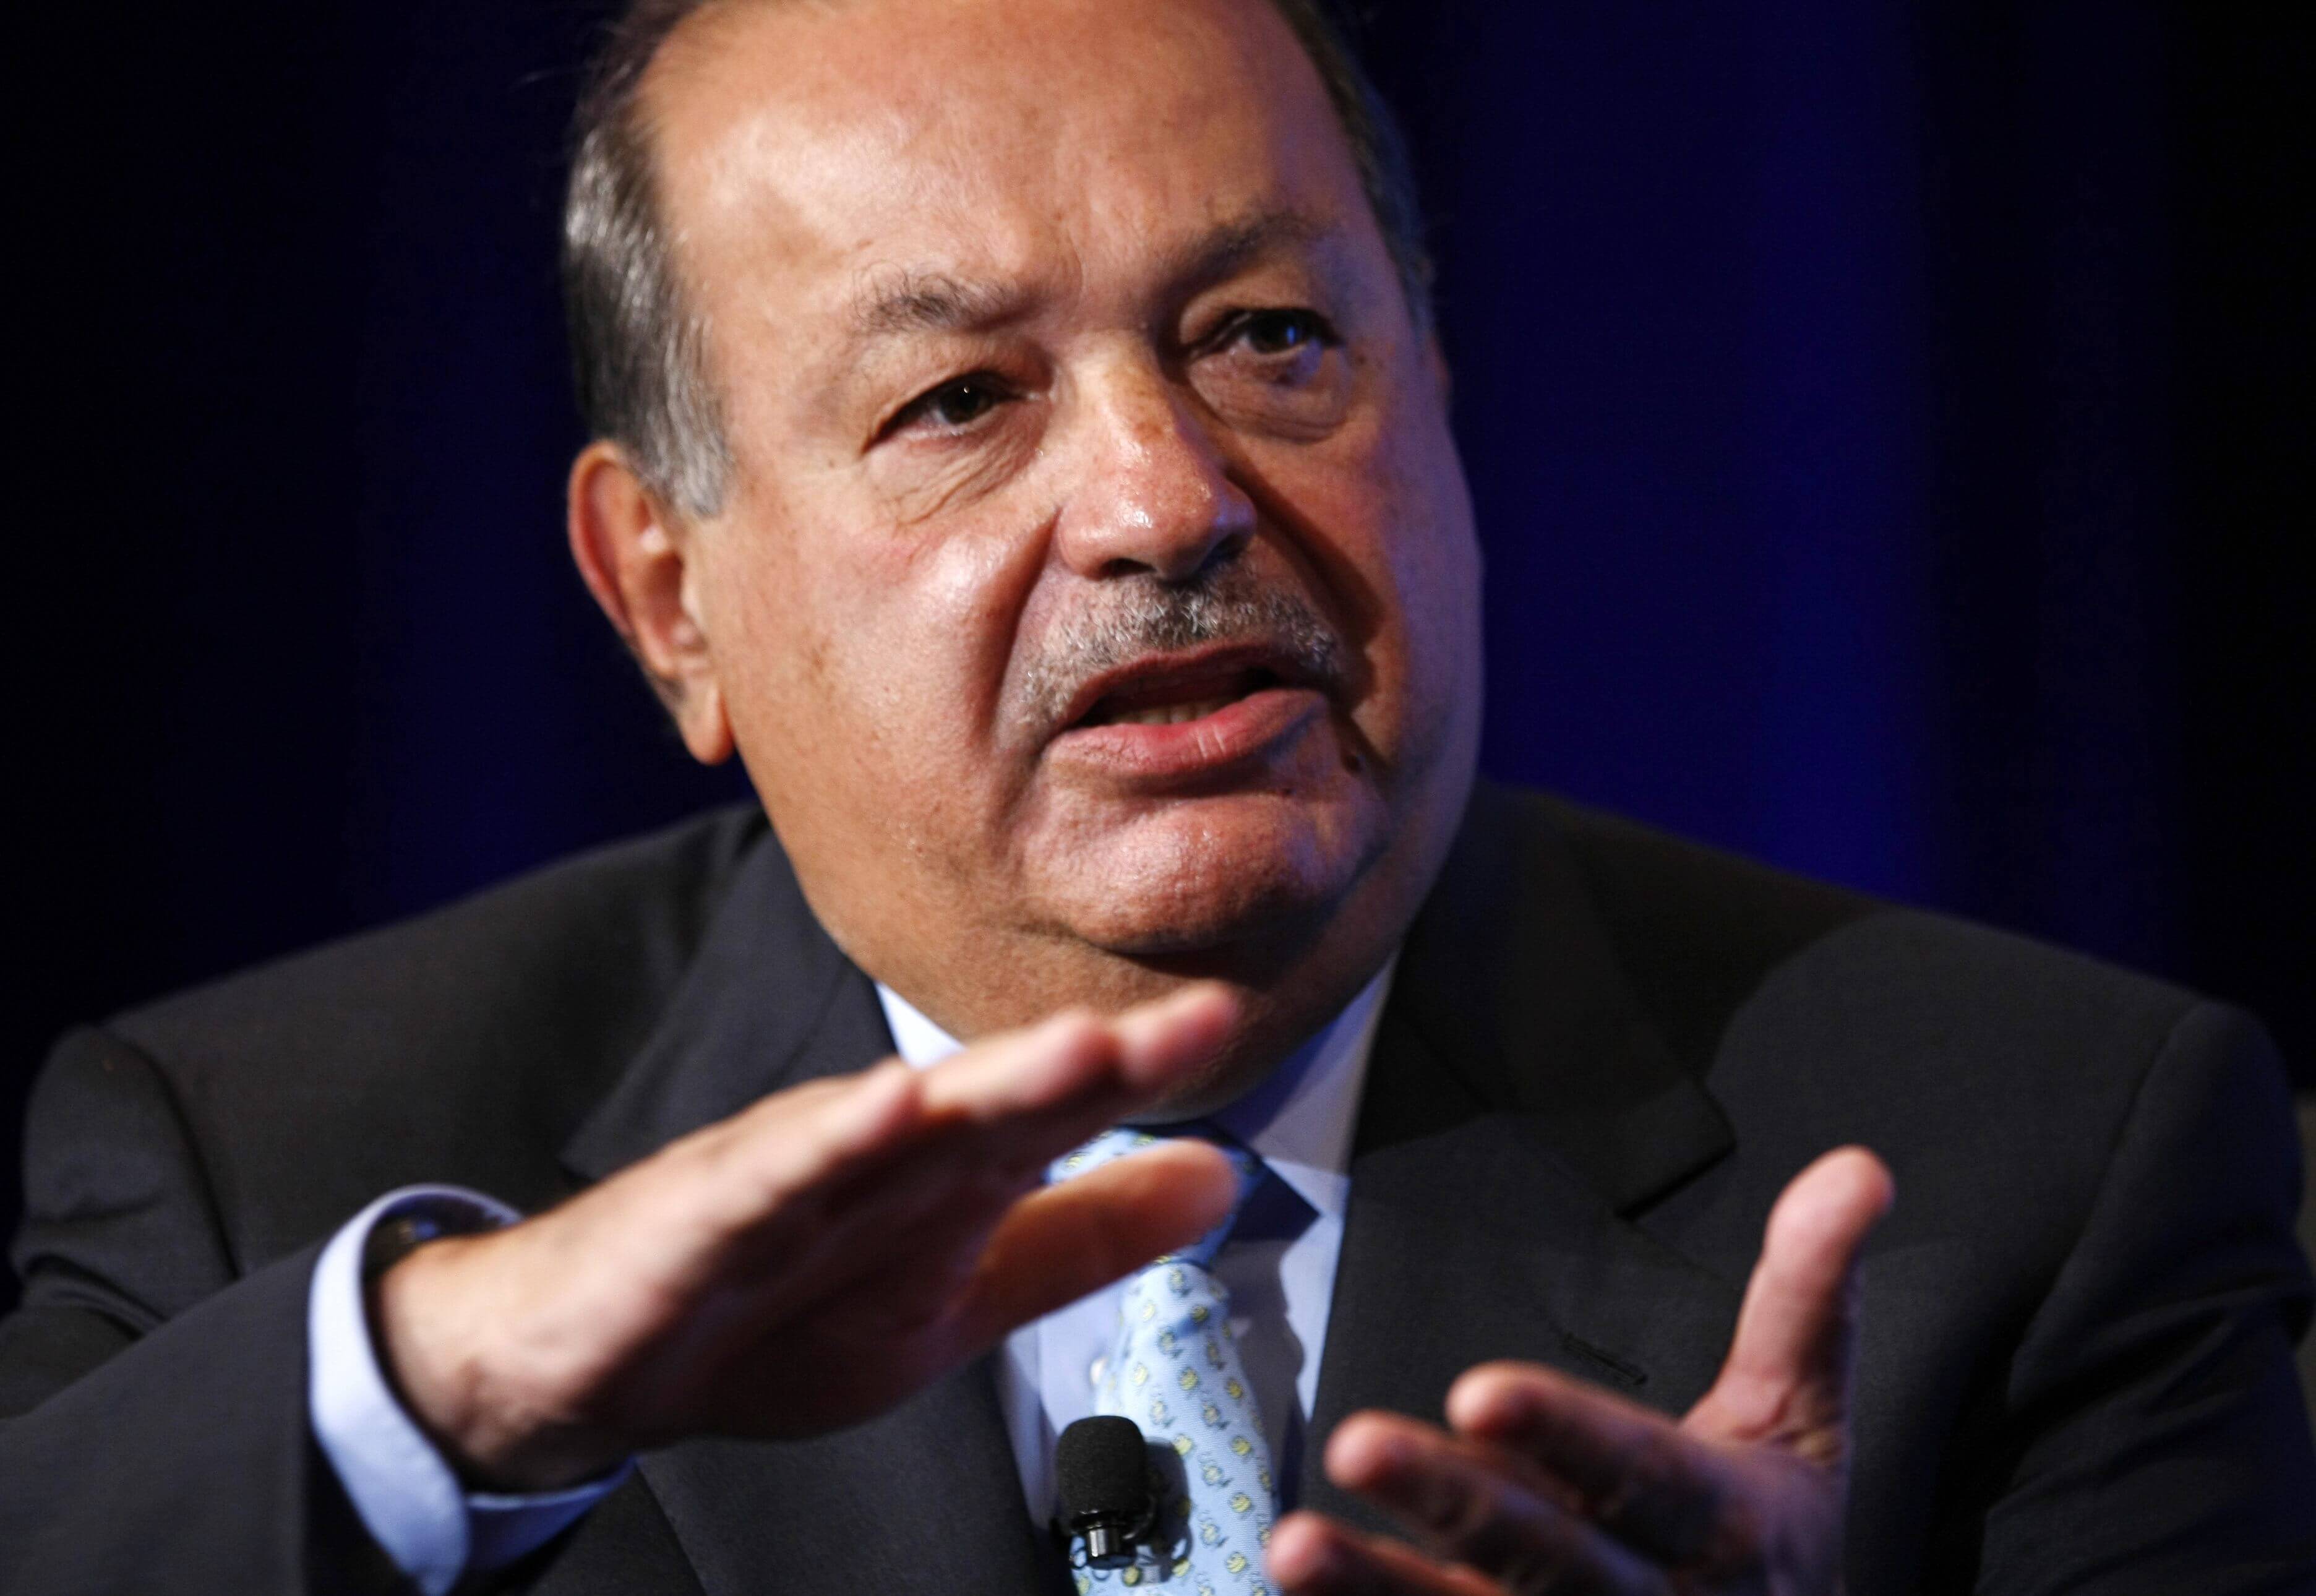 Lifetime Honorary Chairman of Telefonos de Mexico Carlos Slim Helu participates in the Wall St. Journal CEO Council on "Rebuilding Global Prosperity" in Washington in this November 16, 2009 file photo. Slim, named the world's richest man on March 10, 2010, first showed a talent for business as a 10-year-old kid when he filled his pockets with pesos selling drinks and snacks to his family. REUTERS/Kevin Lamarque/Files (UNITED STATES - Tags: BUSINESS HEADSHOT IMAGES OF THE DAY)